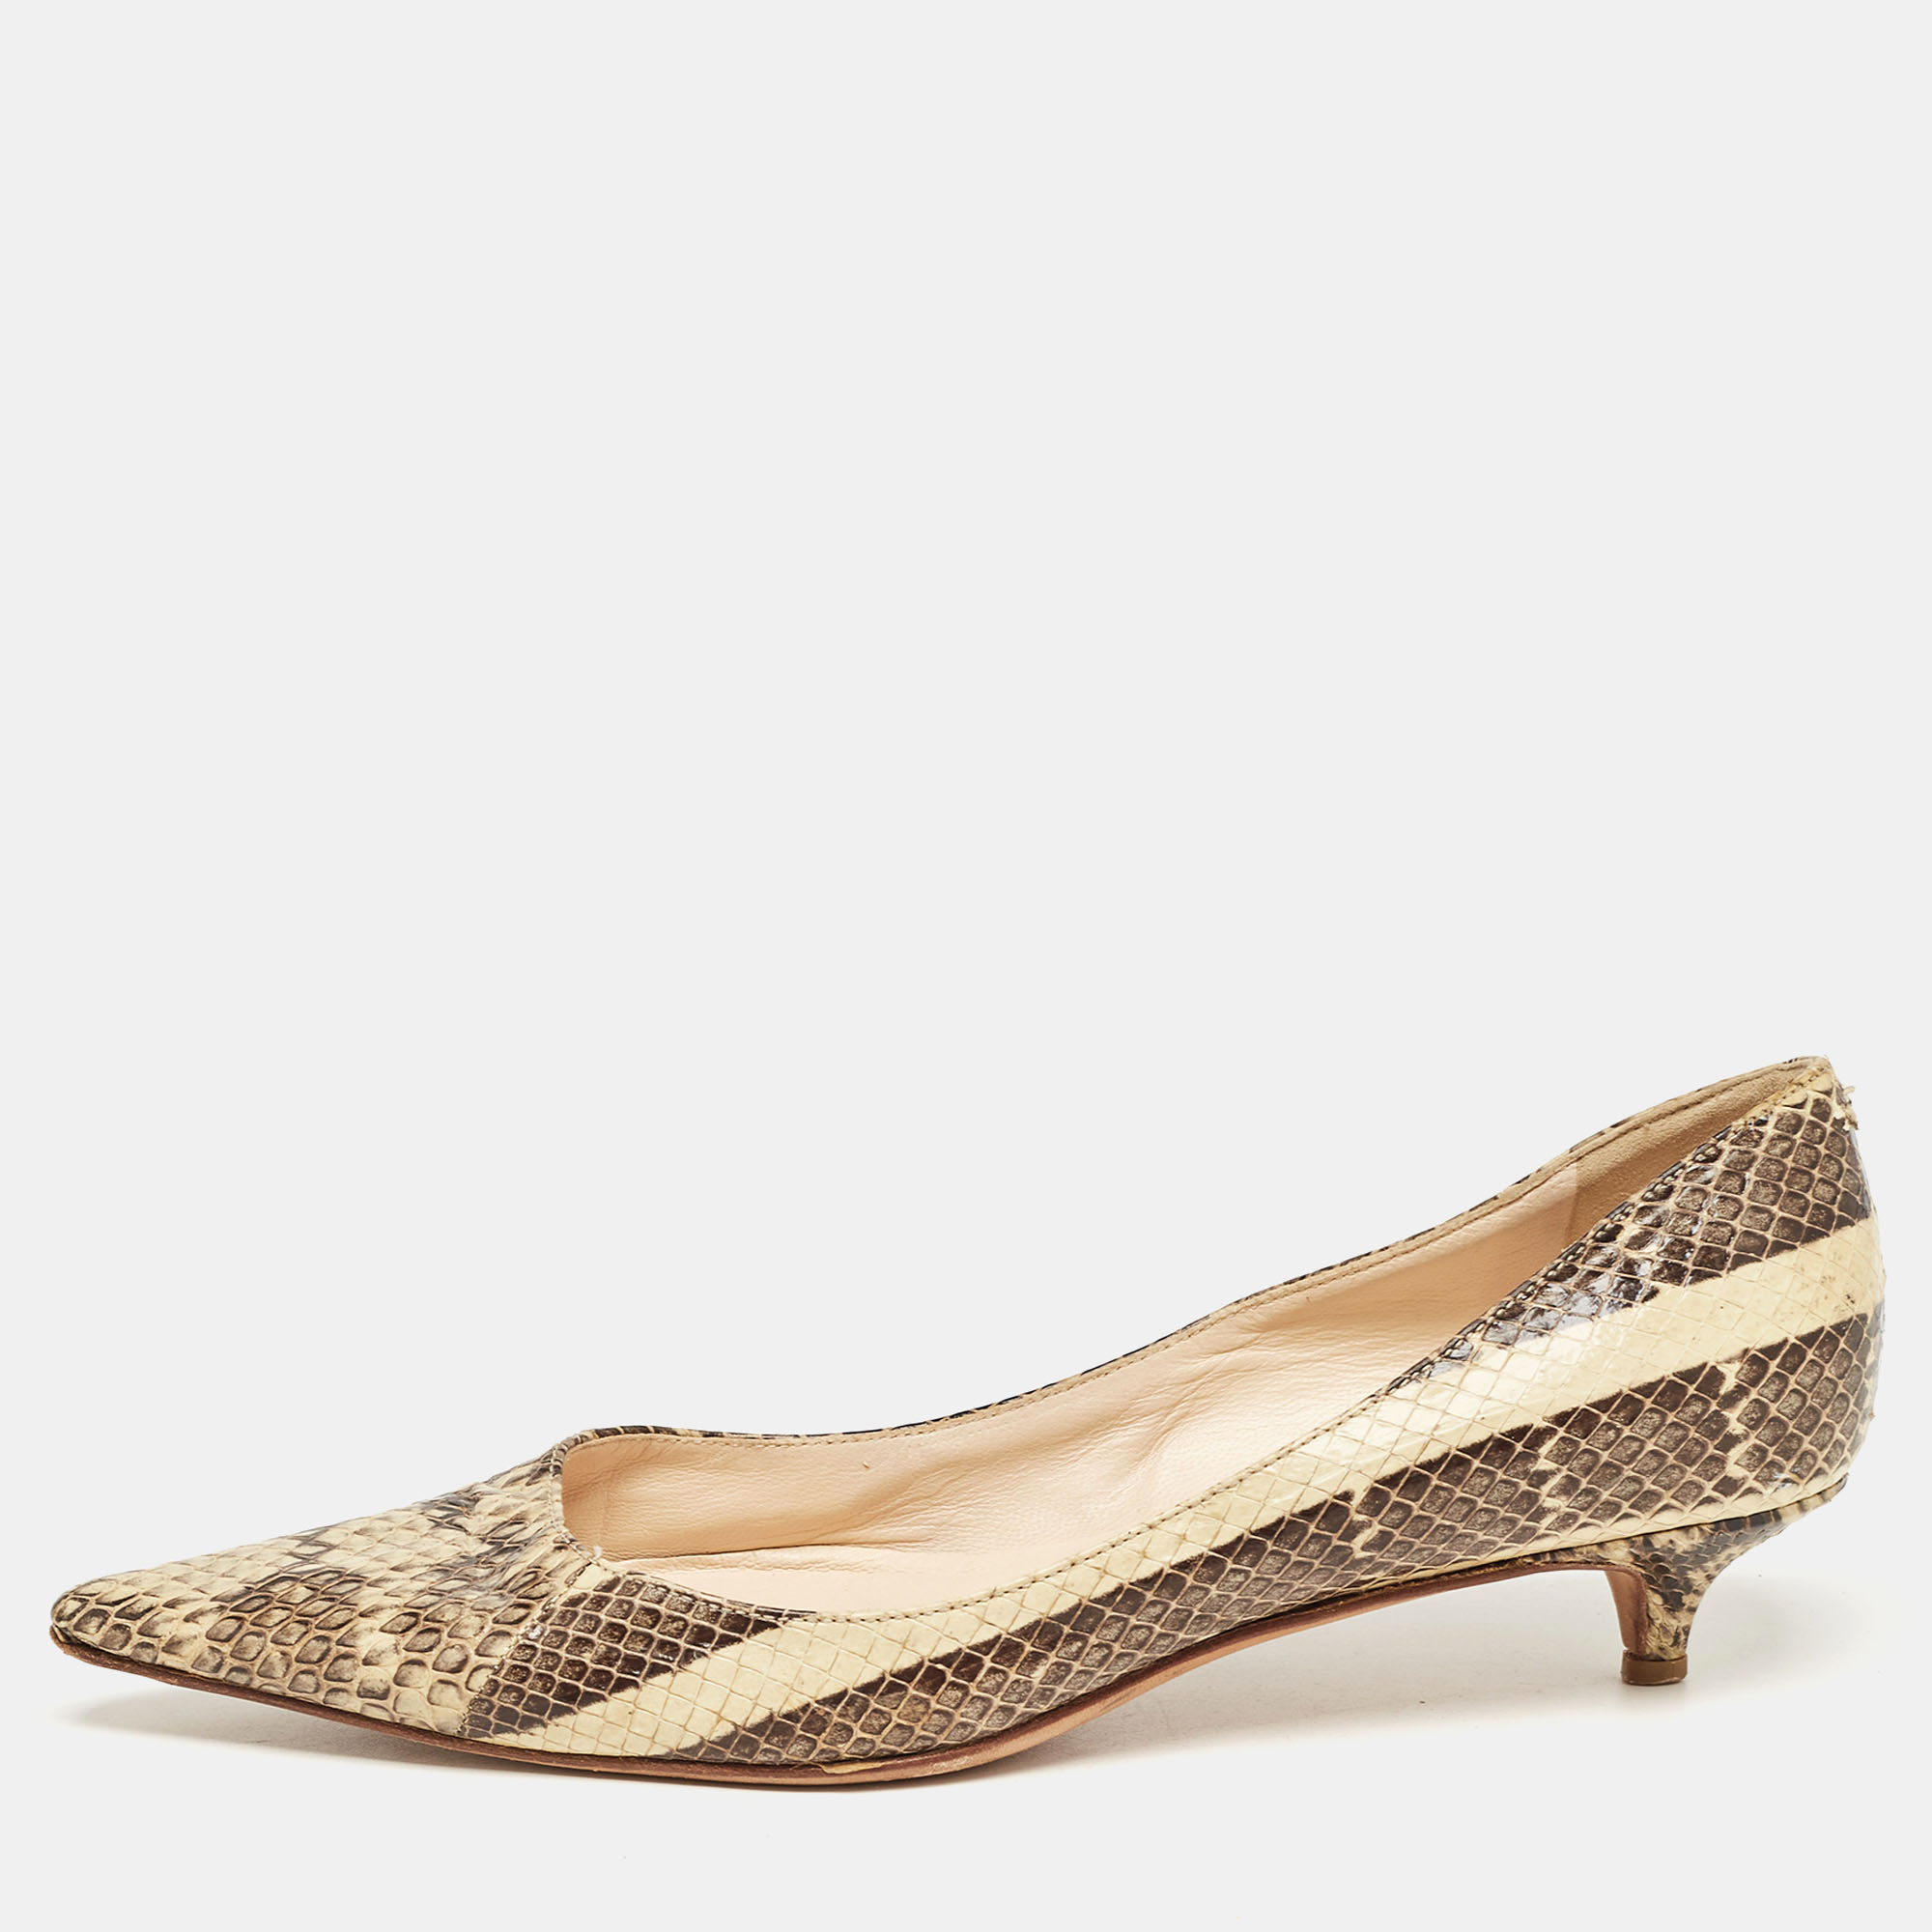 Pre-owned Jimmy Choo Beige/brown Snakeskin Embossed Leather Anouk Pumps Size 35.5